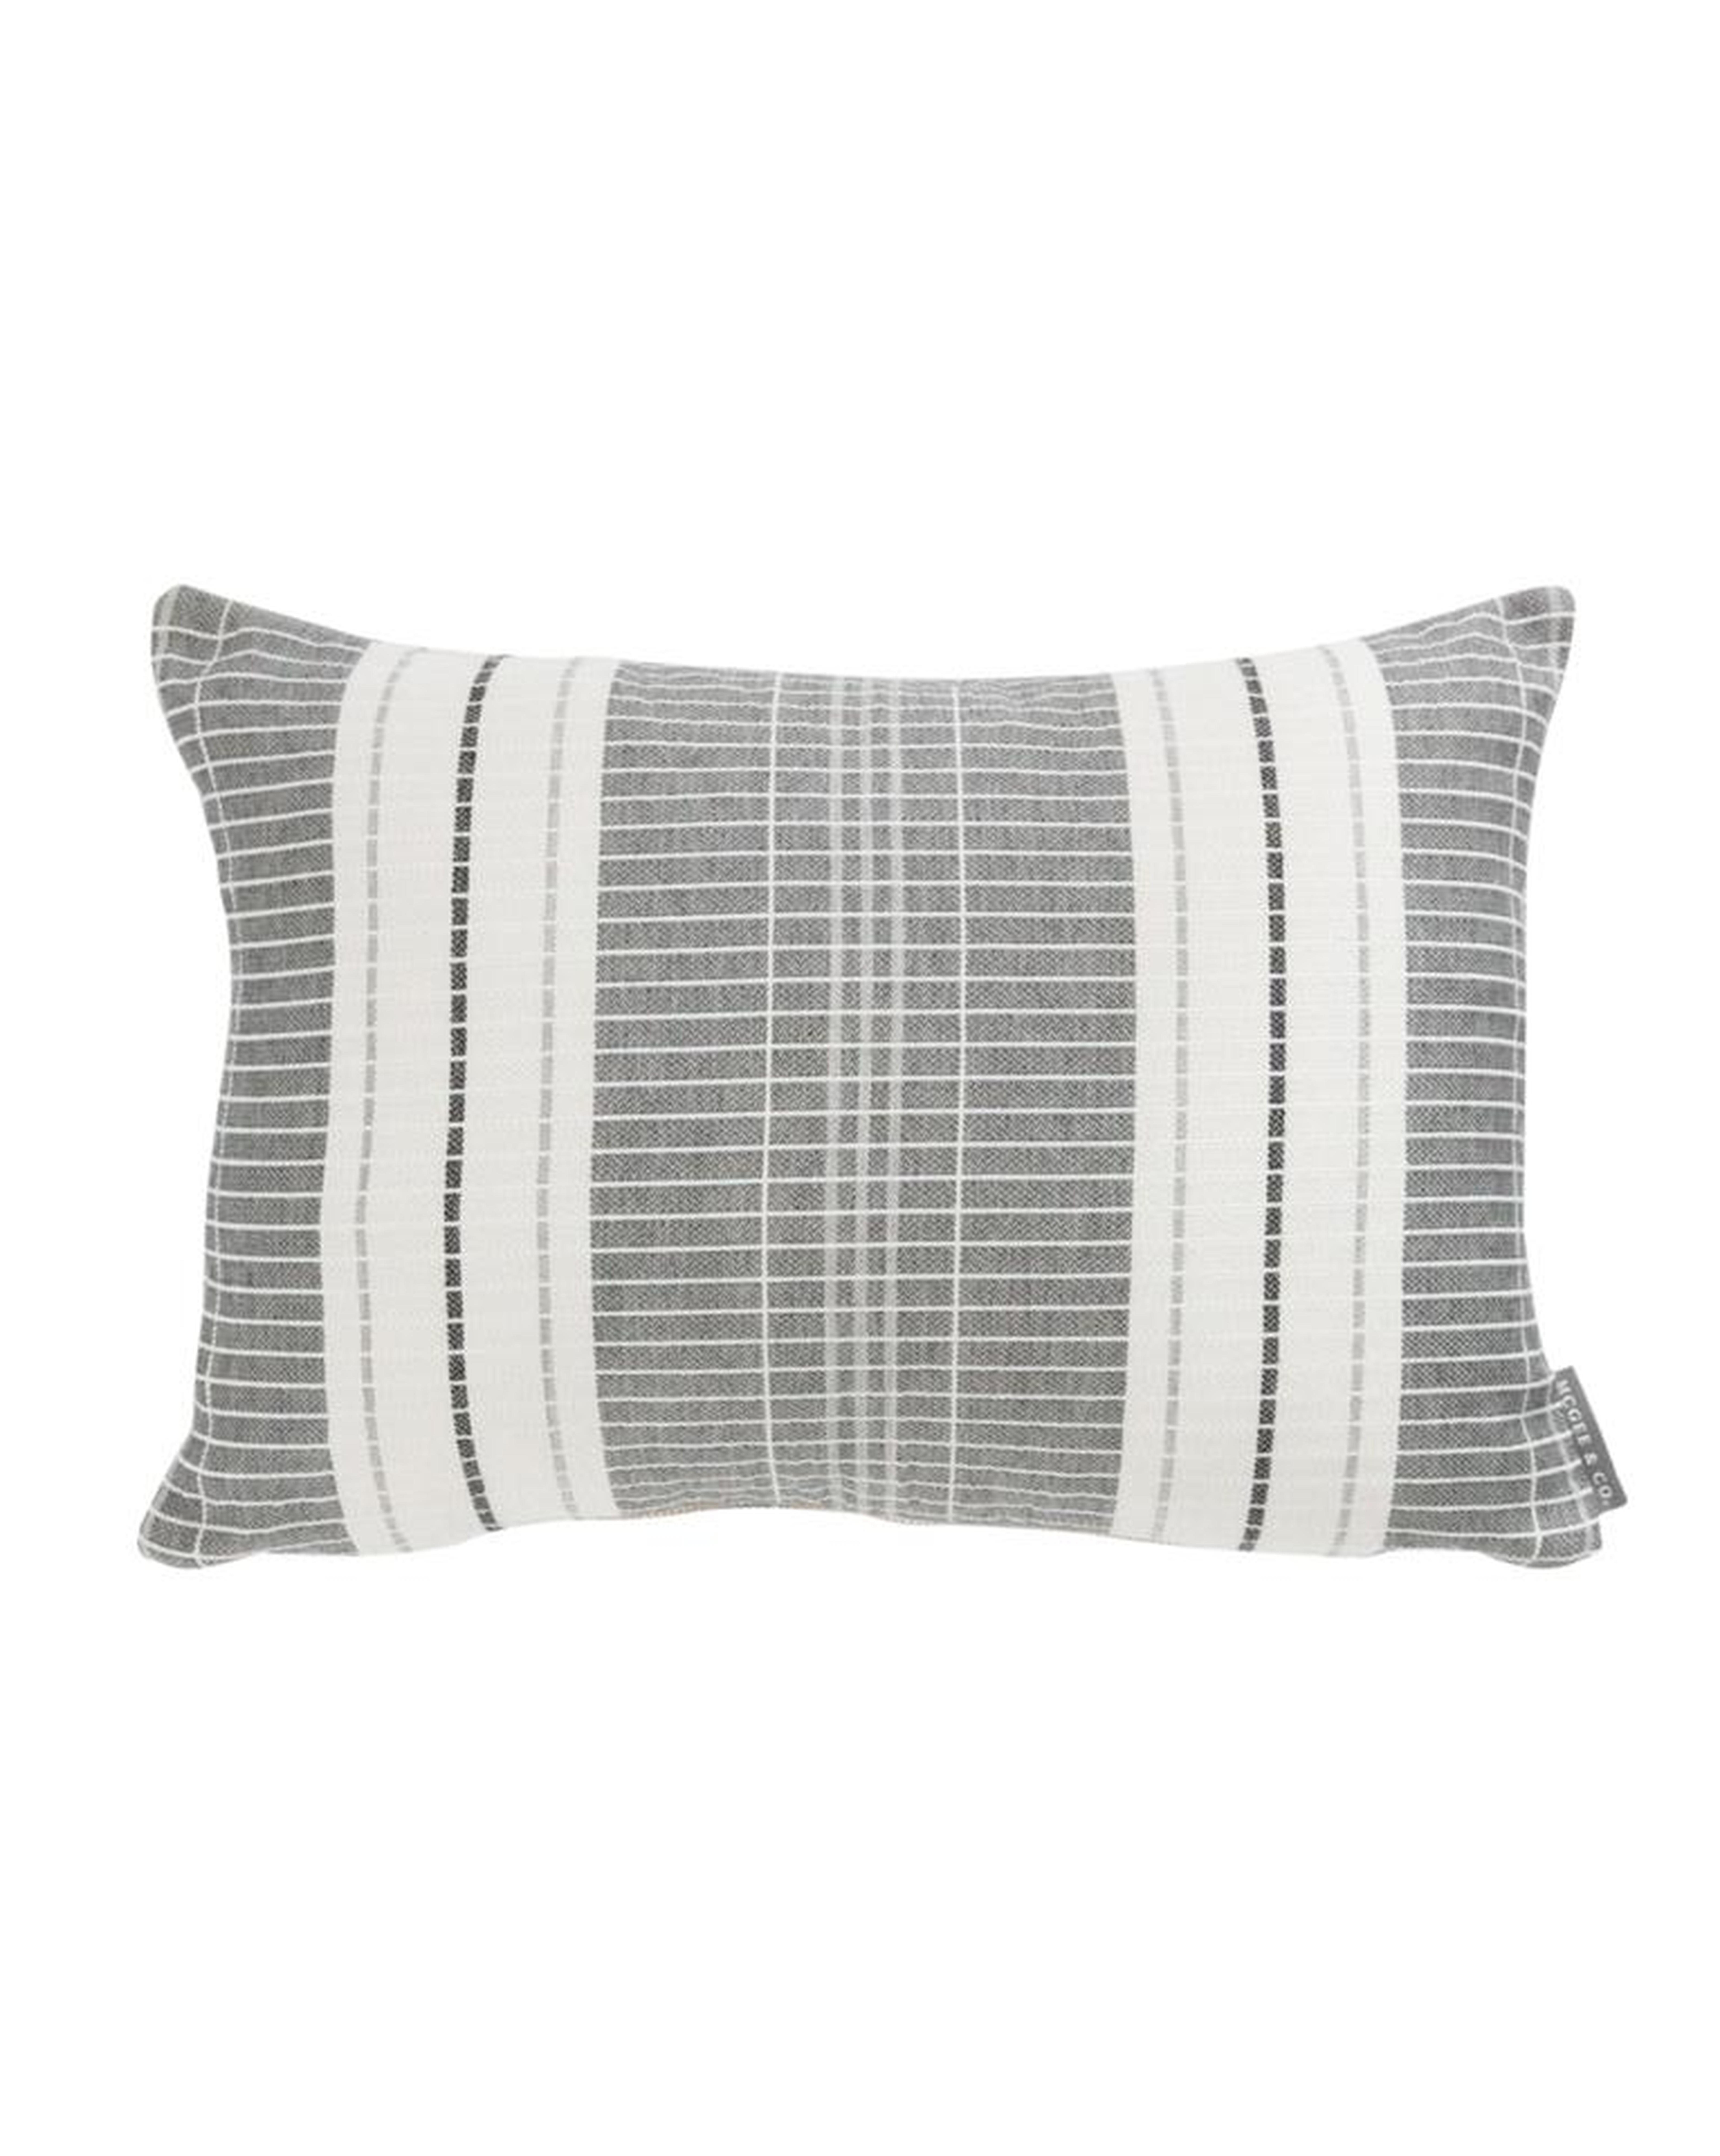 OXFORD WOVEN PLAID PILLOW COVER - McGee & Co.